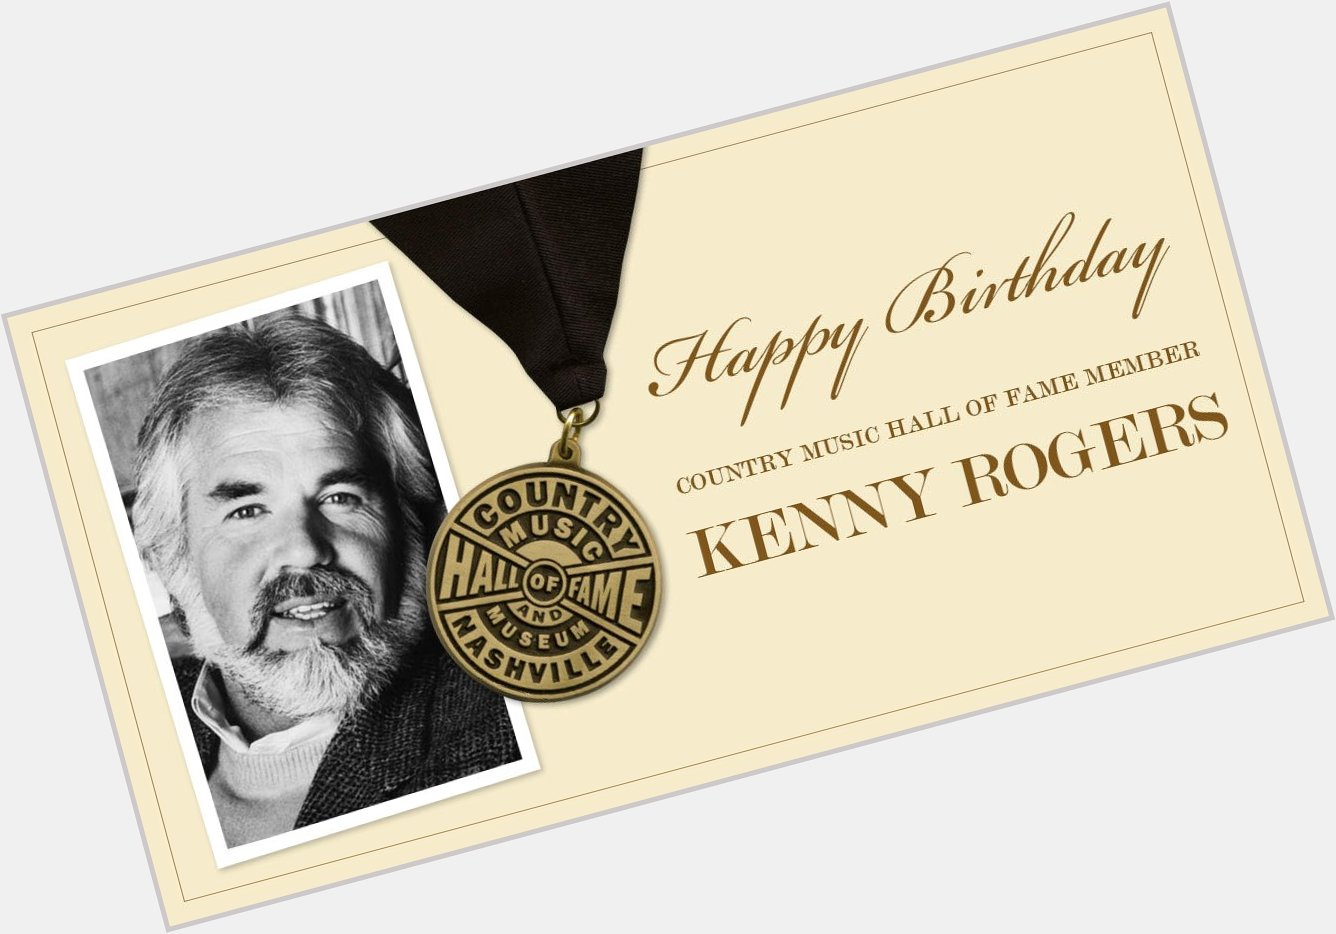 Help us wish Country Music Hall of Fame member Kenny Rogers a very Happy Birthday! 